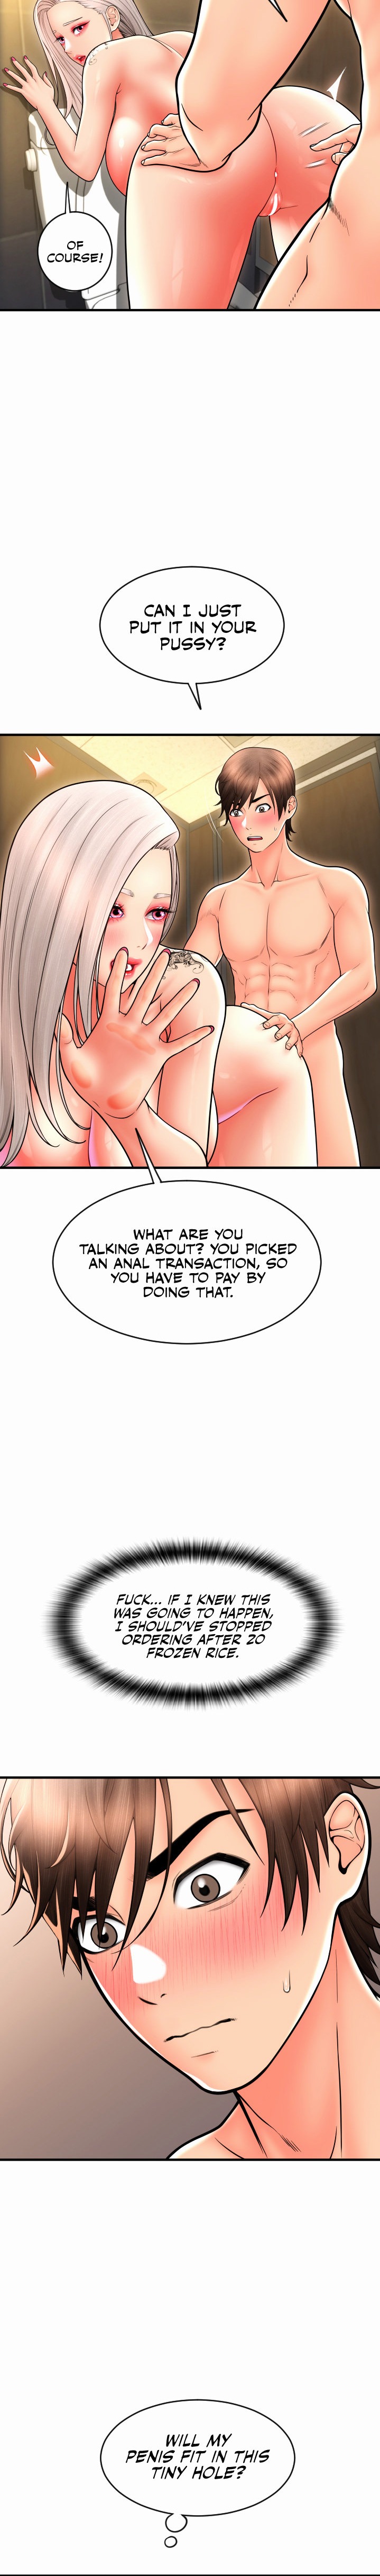 Pay with Sperm Pay - Chapter 15 Page 9